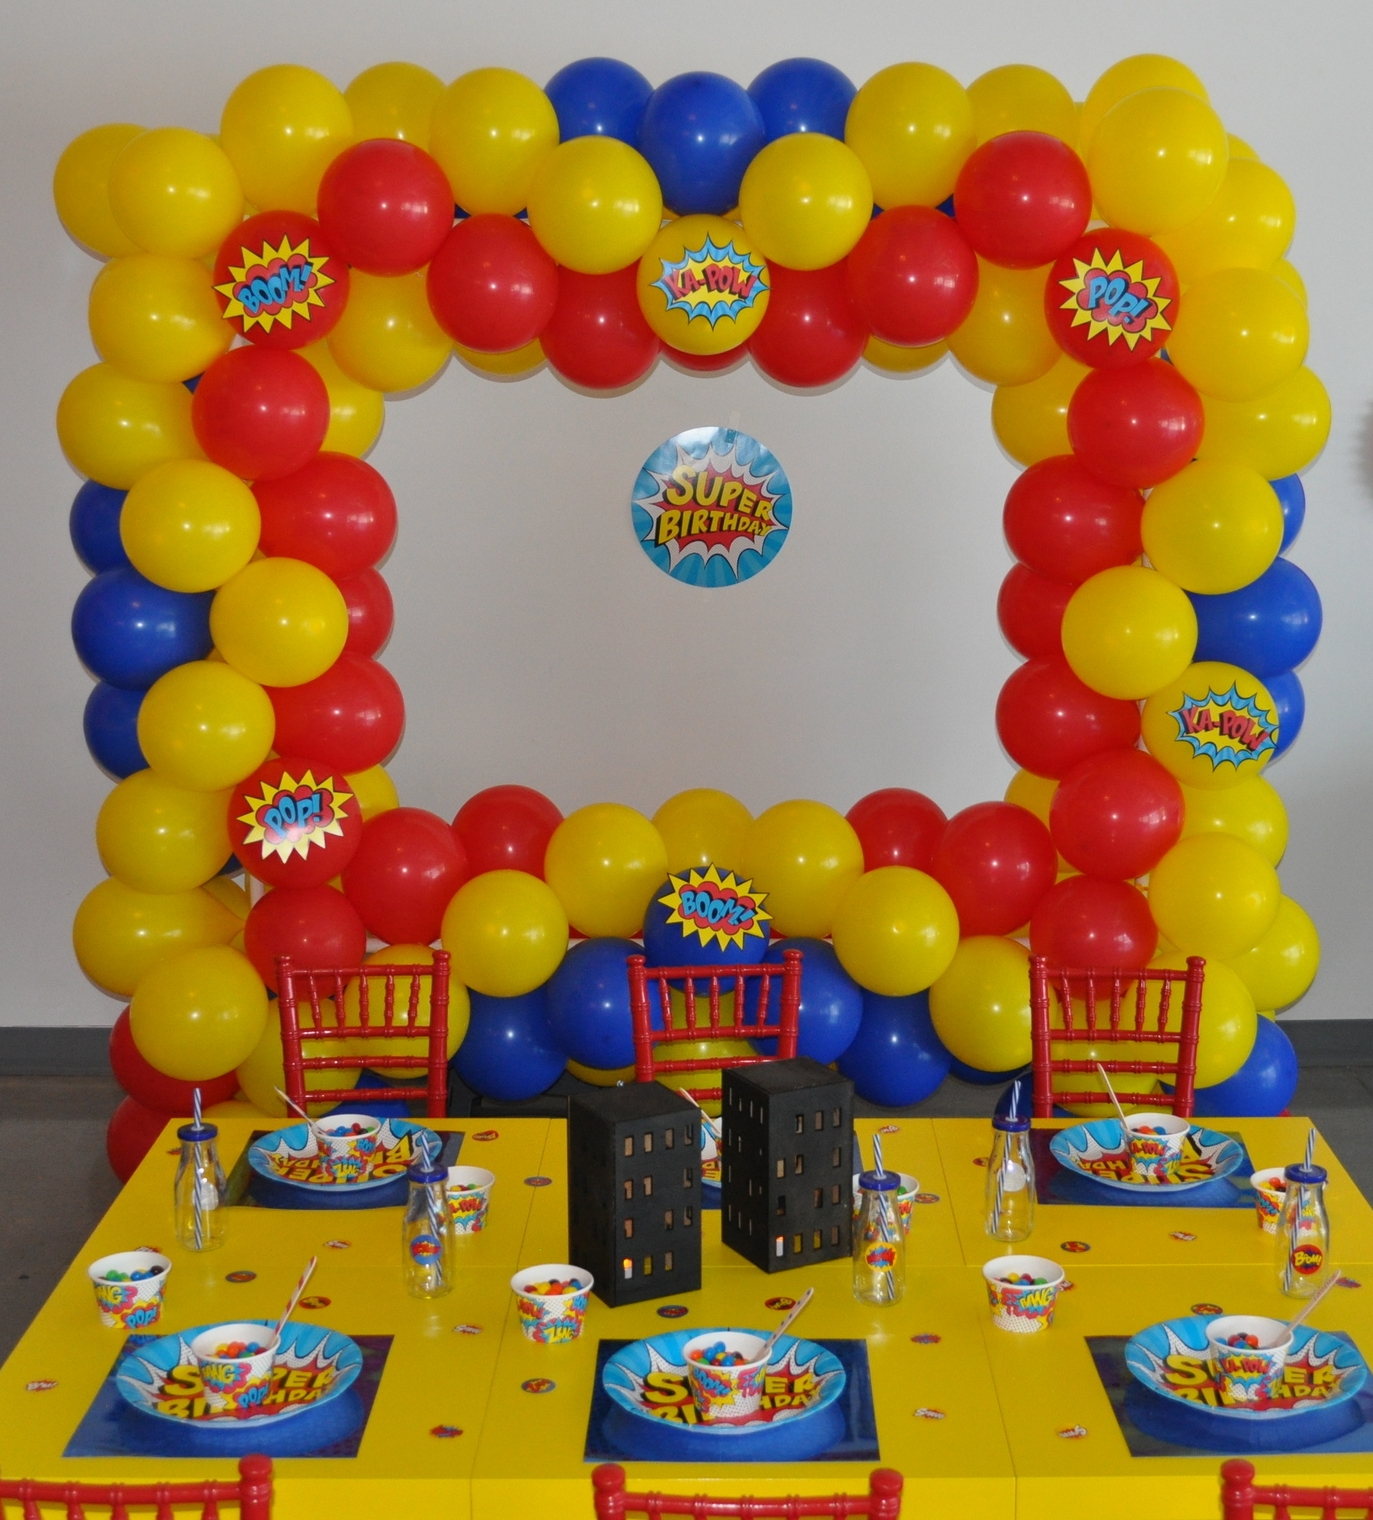 Super Hero balloon selfie station. Tablescape by EllyB Events.